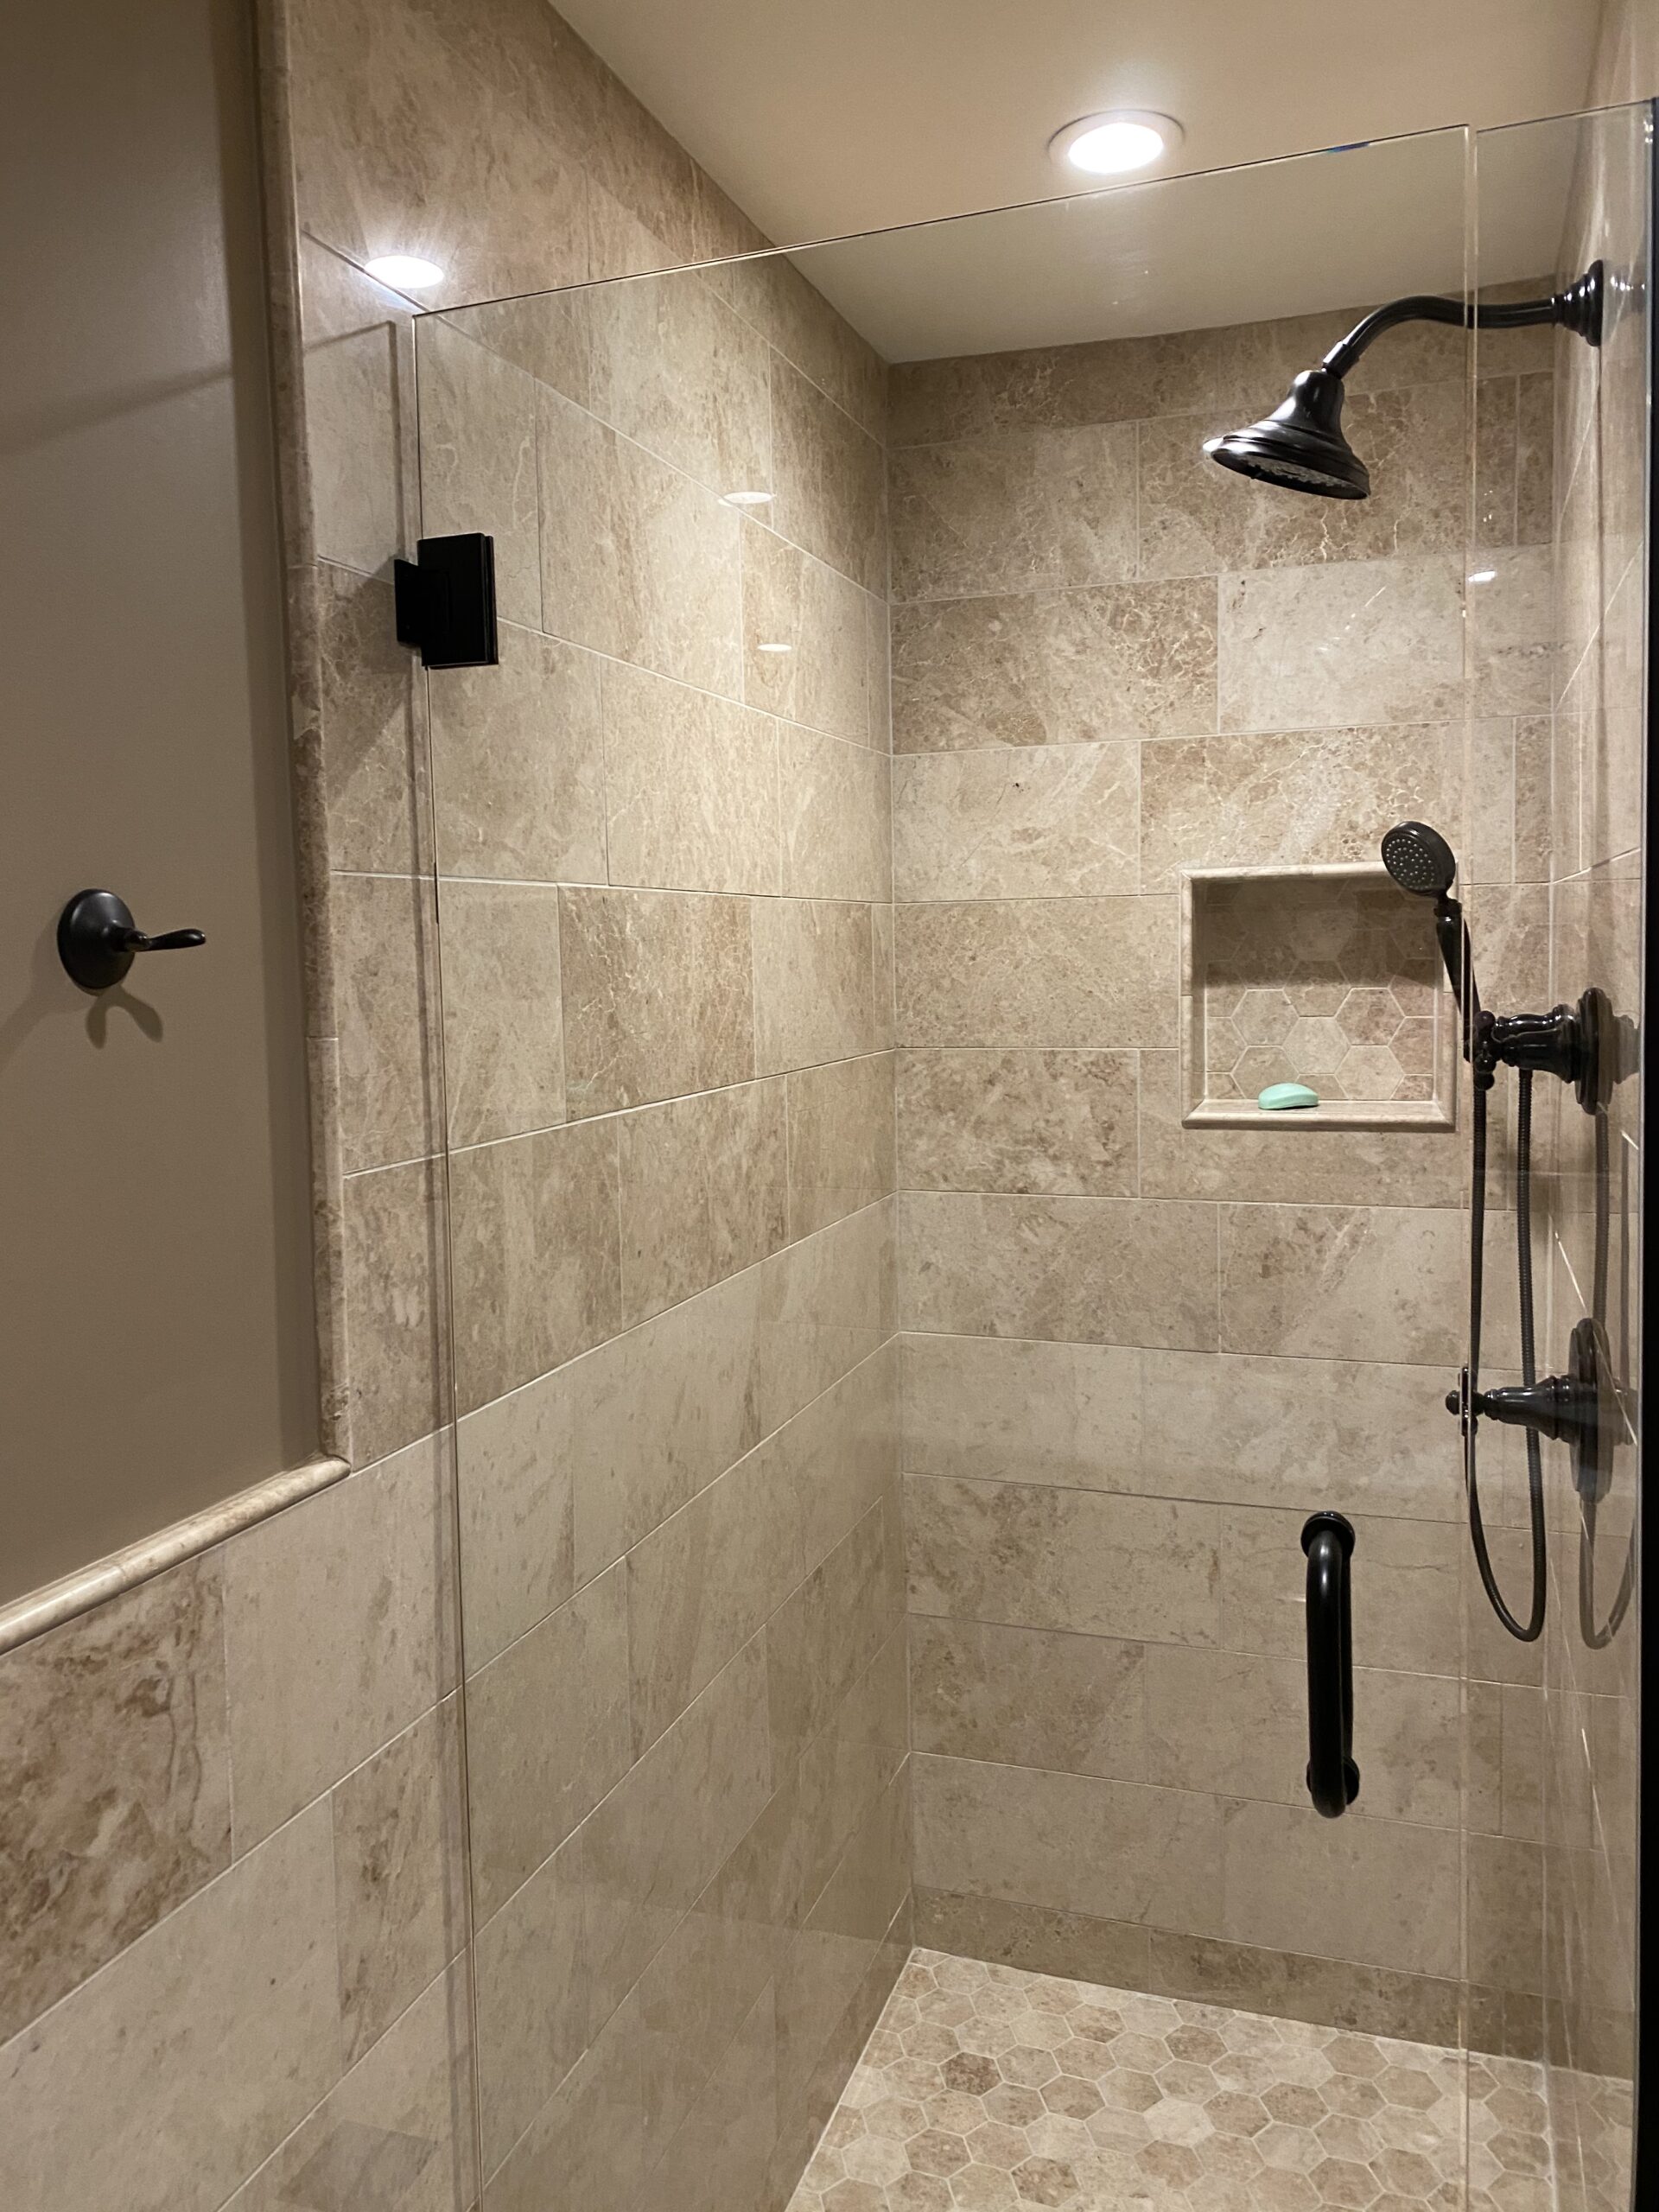 Shower with rectangular tiles, space for bottles, and two shower heads